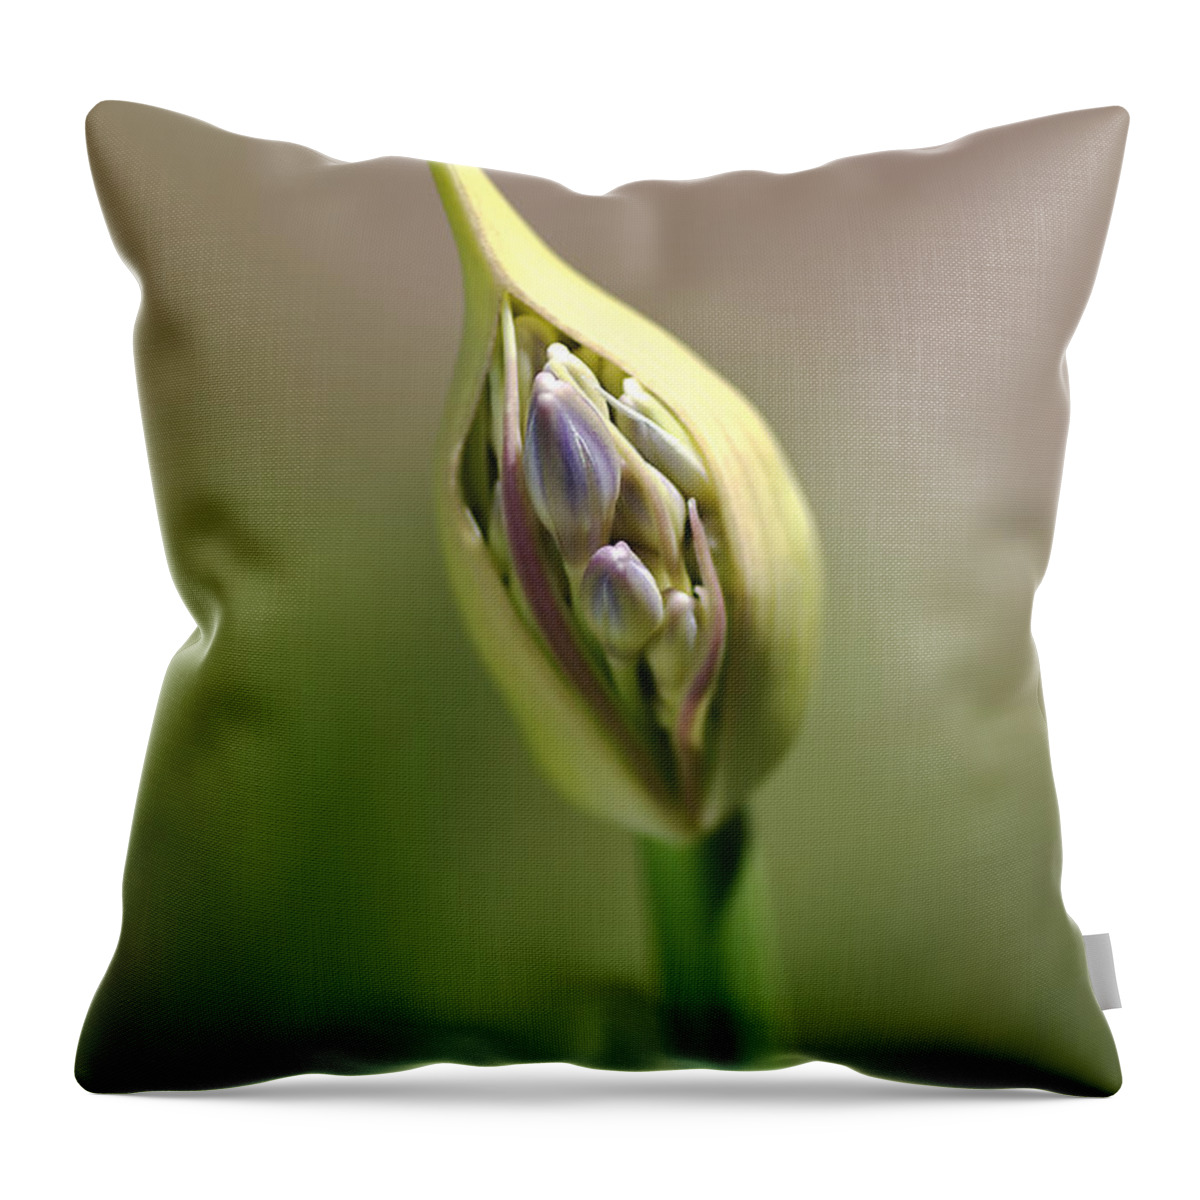 Lily Of The Nile Throw Pillow featuring the photograph Flower-agapanthus-bud by Joy Watson